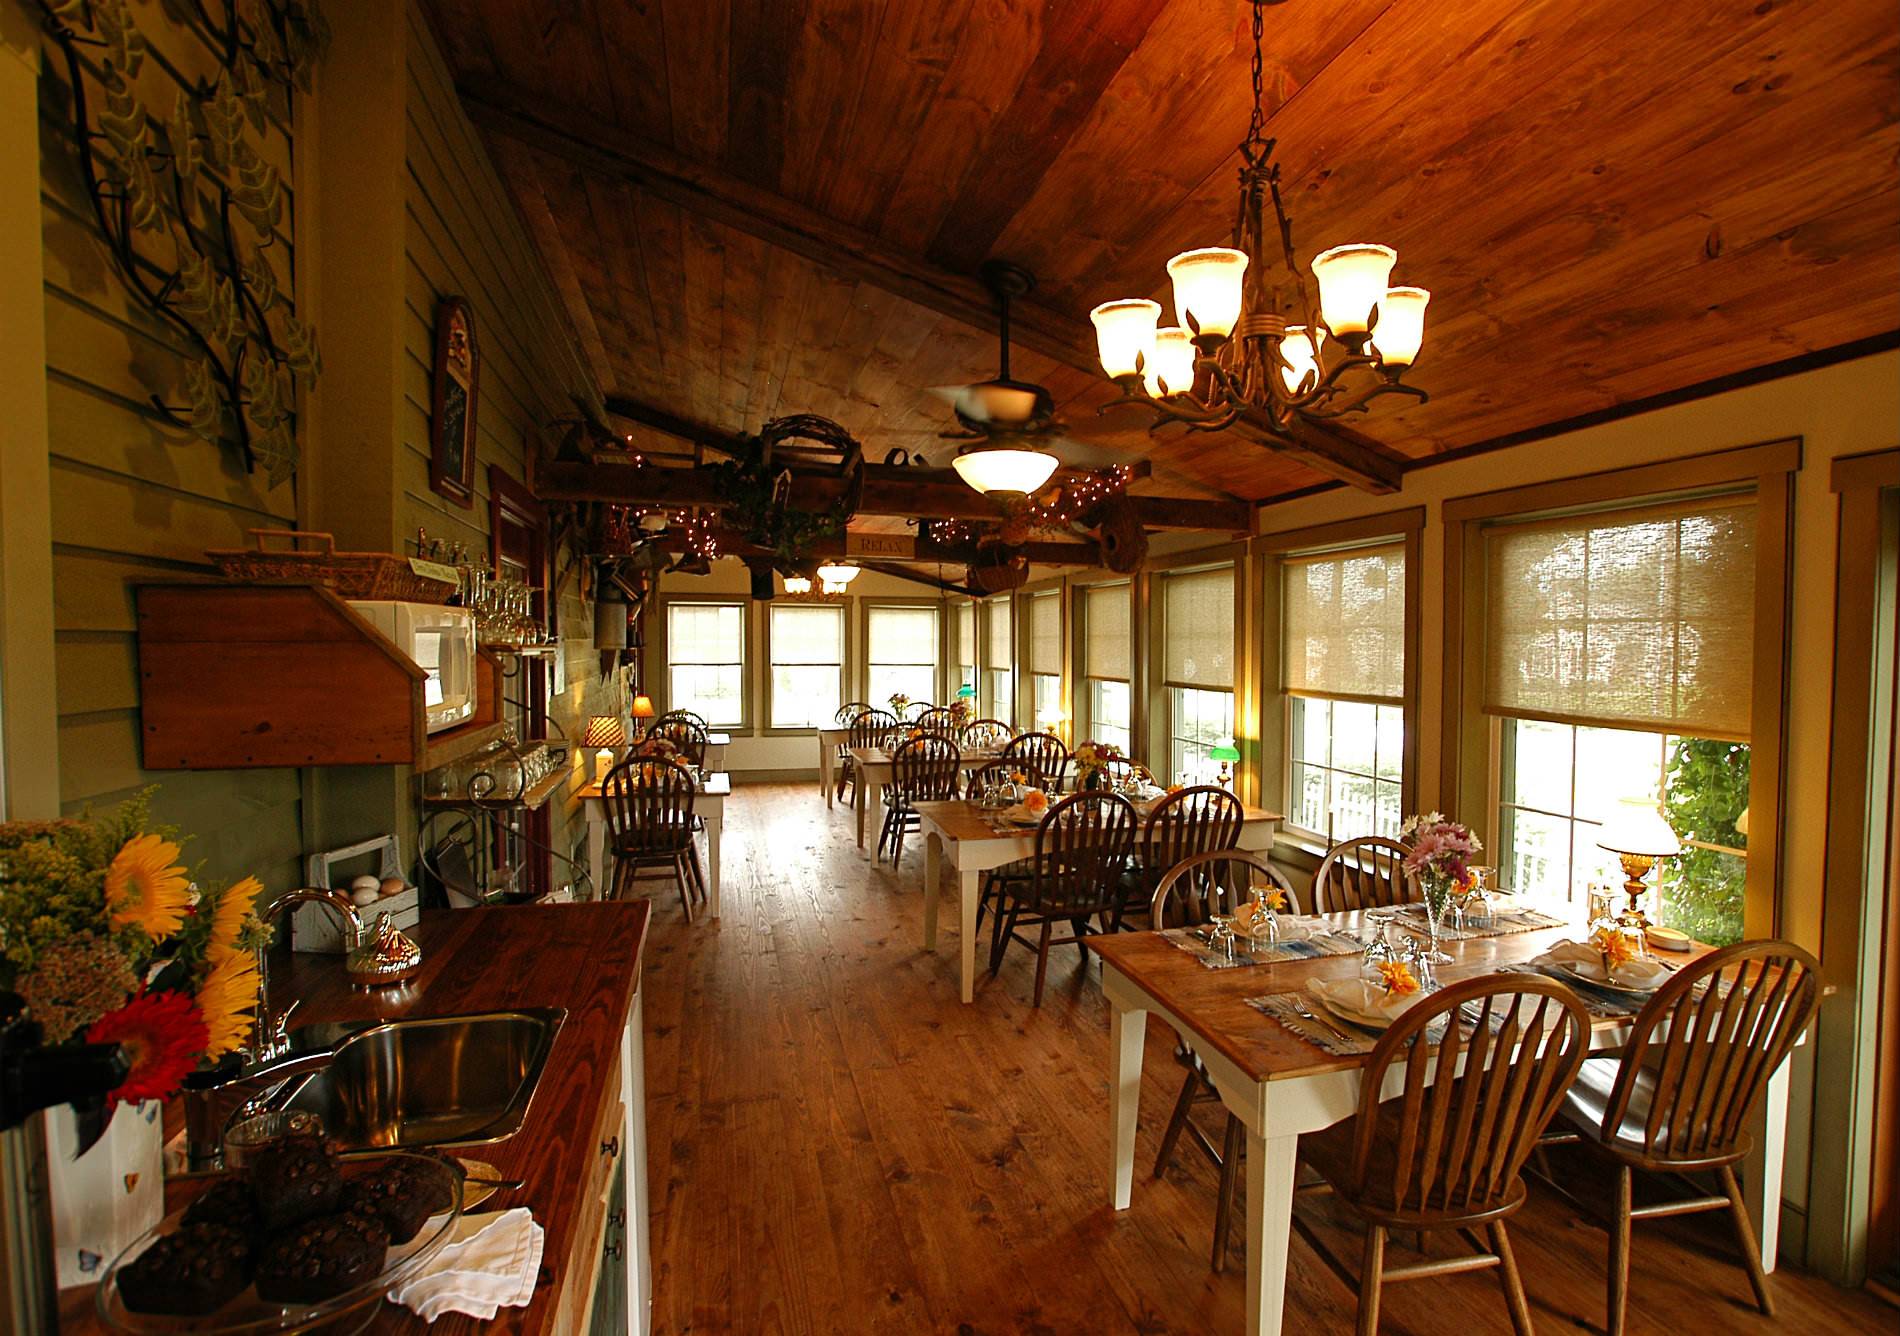 A dining room with wood floors and celings. Several tables in the room each have four plates with a yellow flower on all plates.